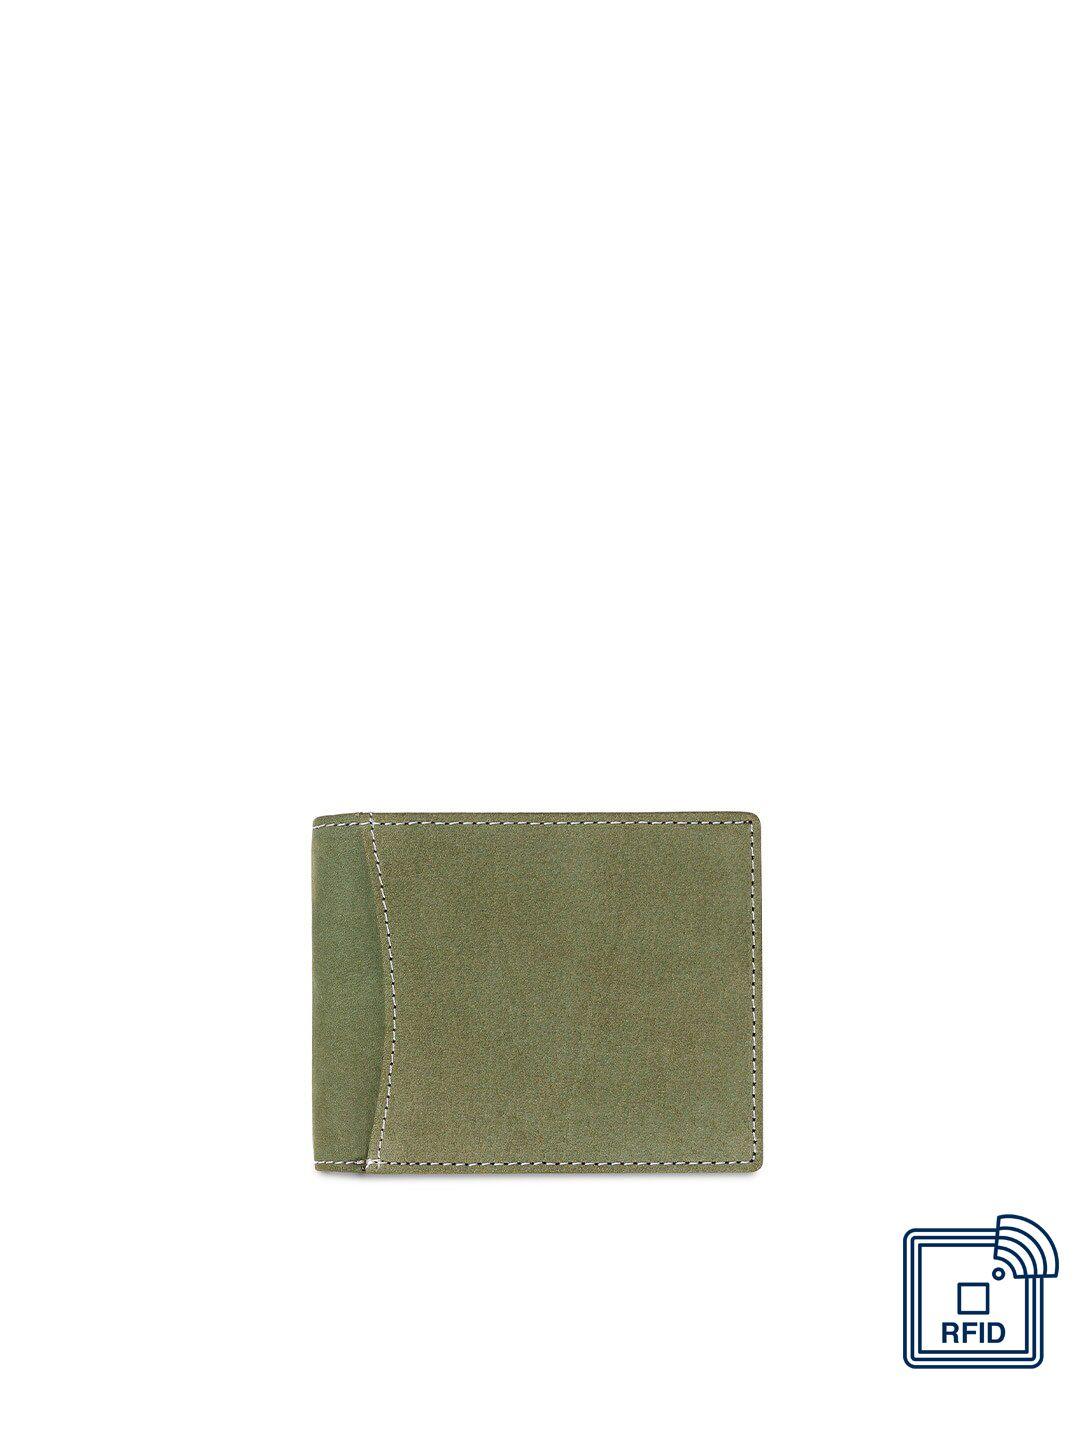 samtroh men olive green leather rfid protected two fold wallet